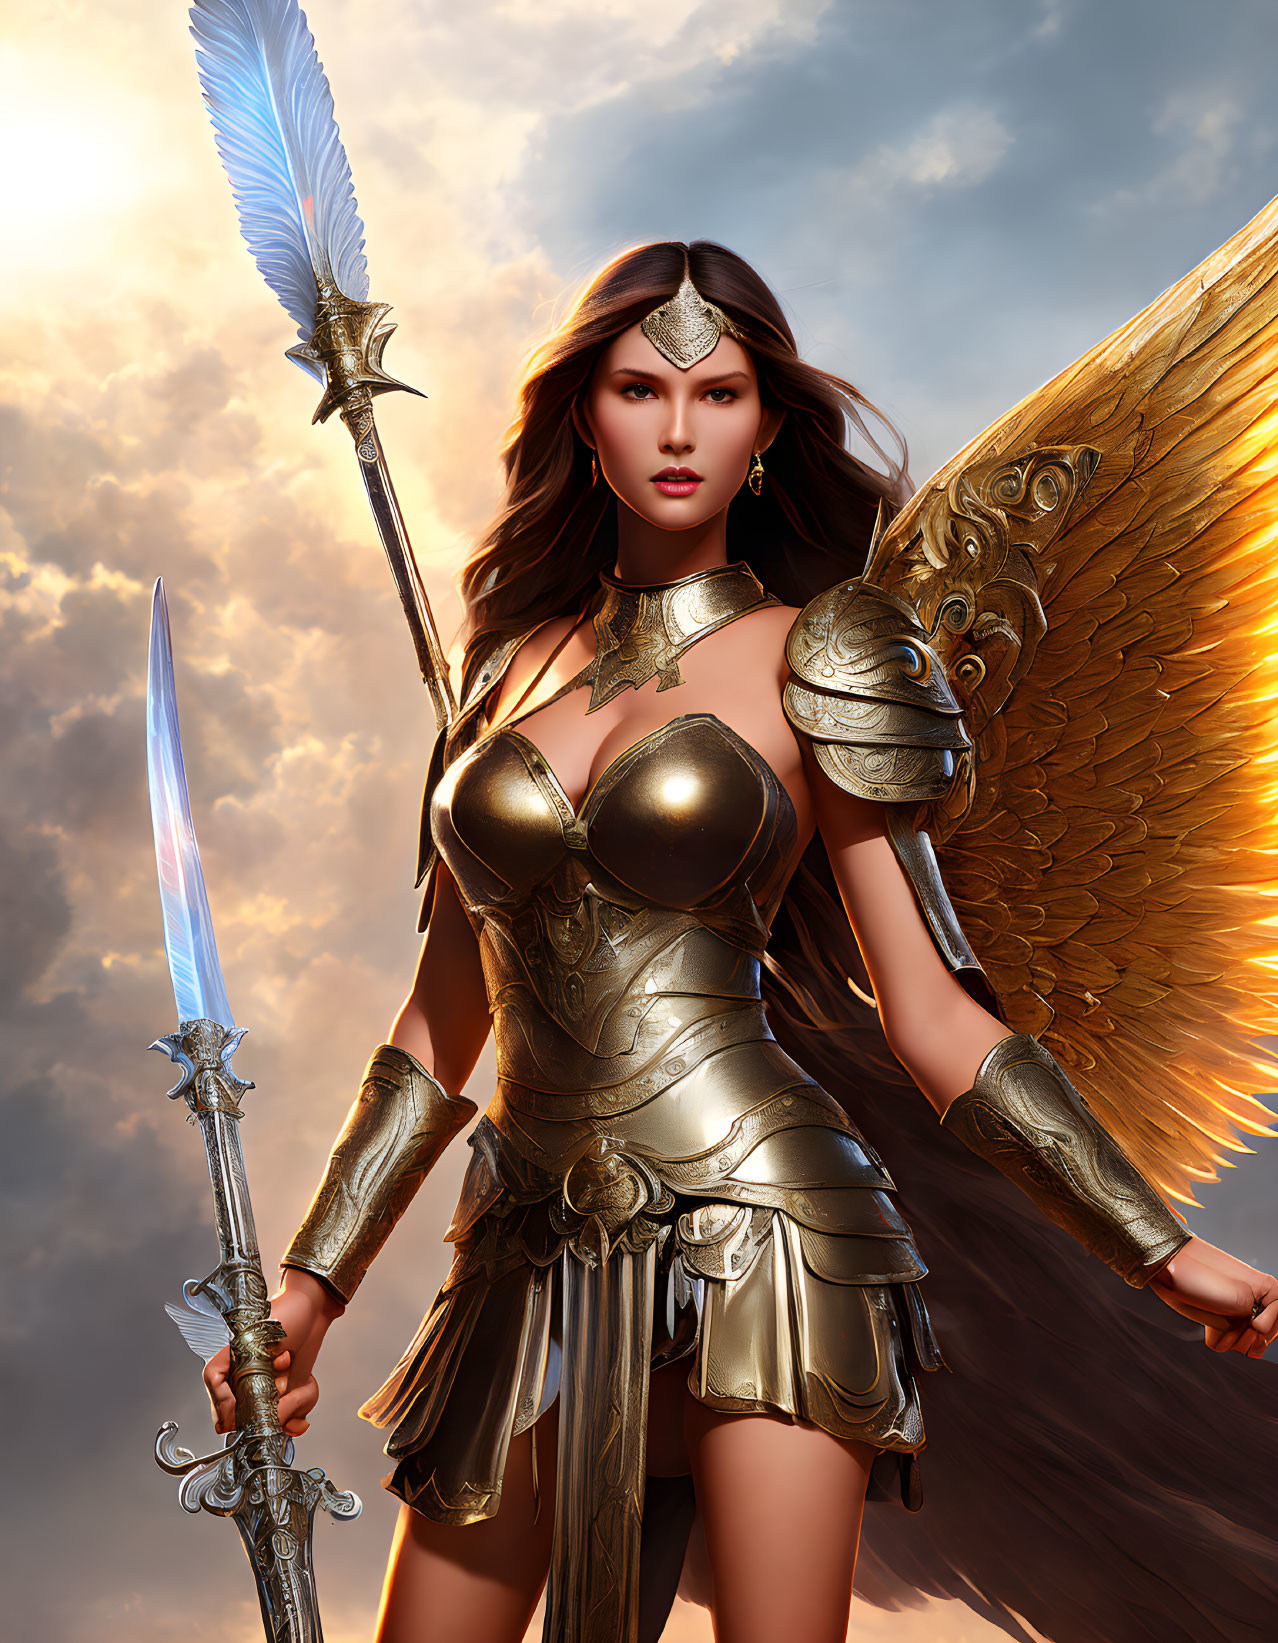 Female warrior in golden armor with wings, sword, and quill under dramatic sky